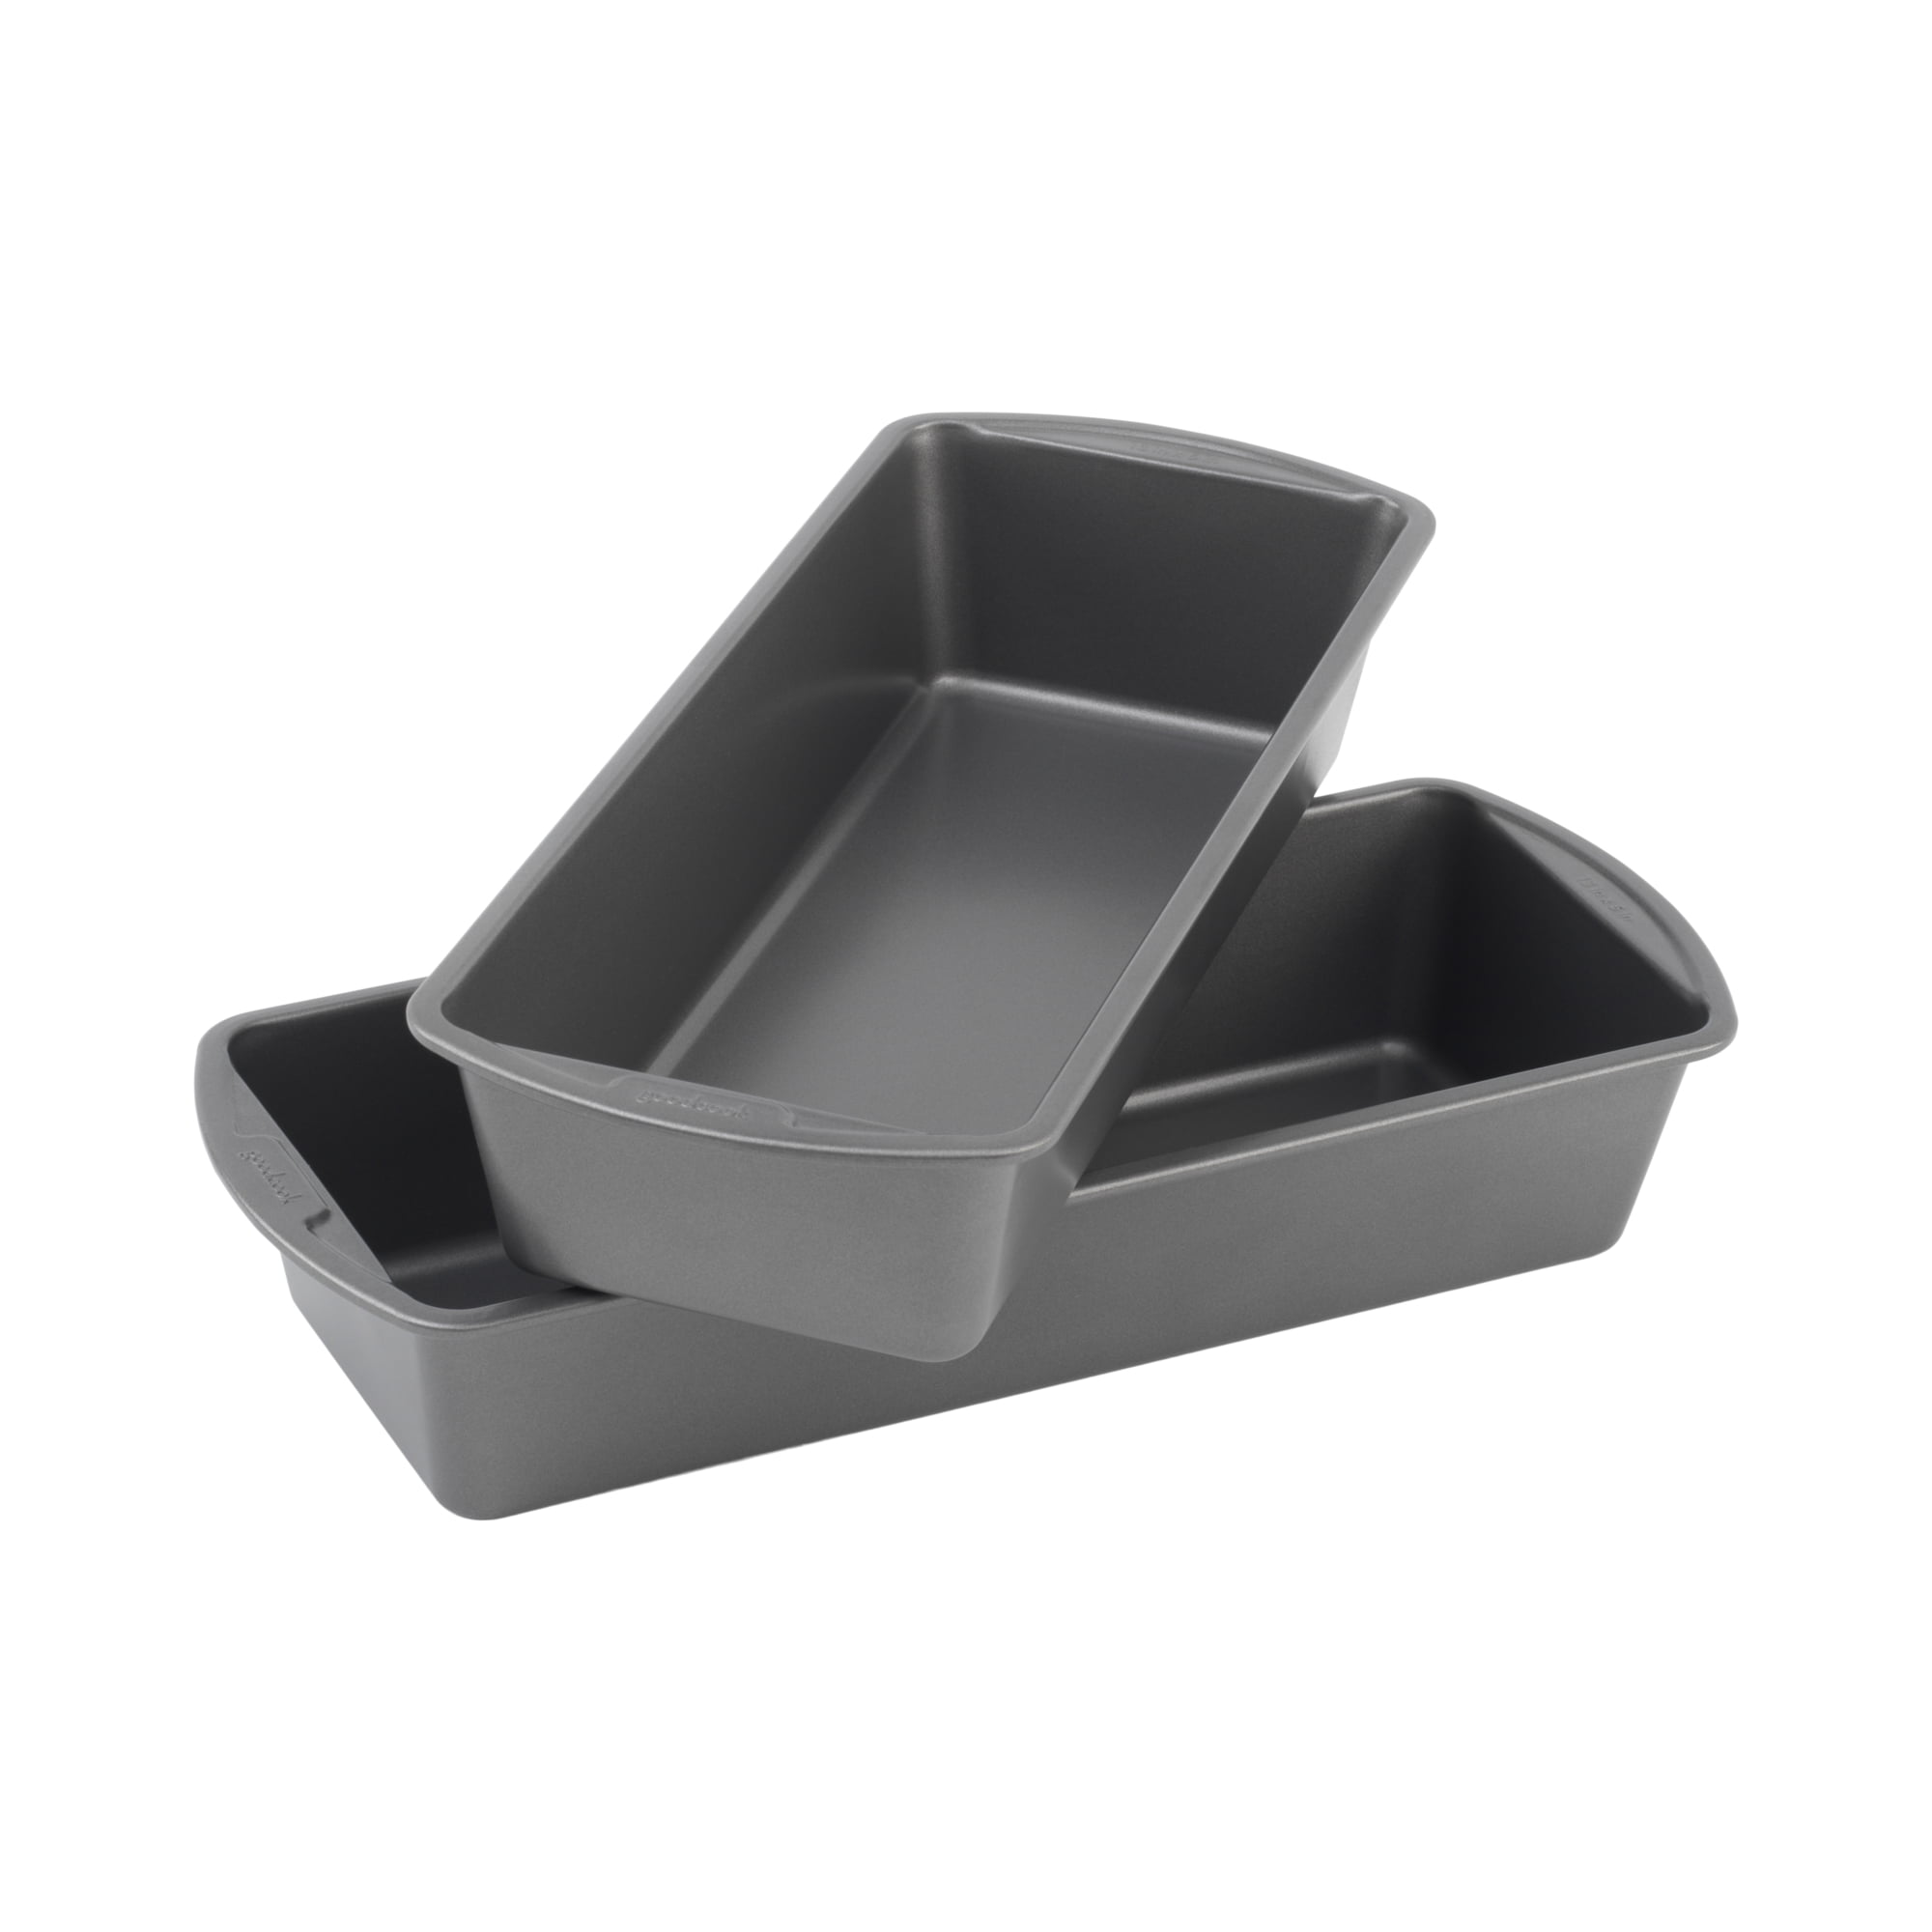  Good Cook Loaf Pan, 9 x 5 Inch, Gray: Loaf Baking Pans: Home &  Kitchen